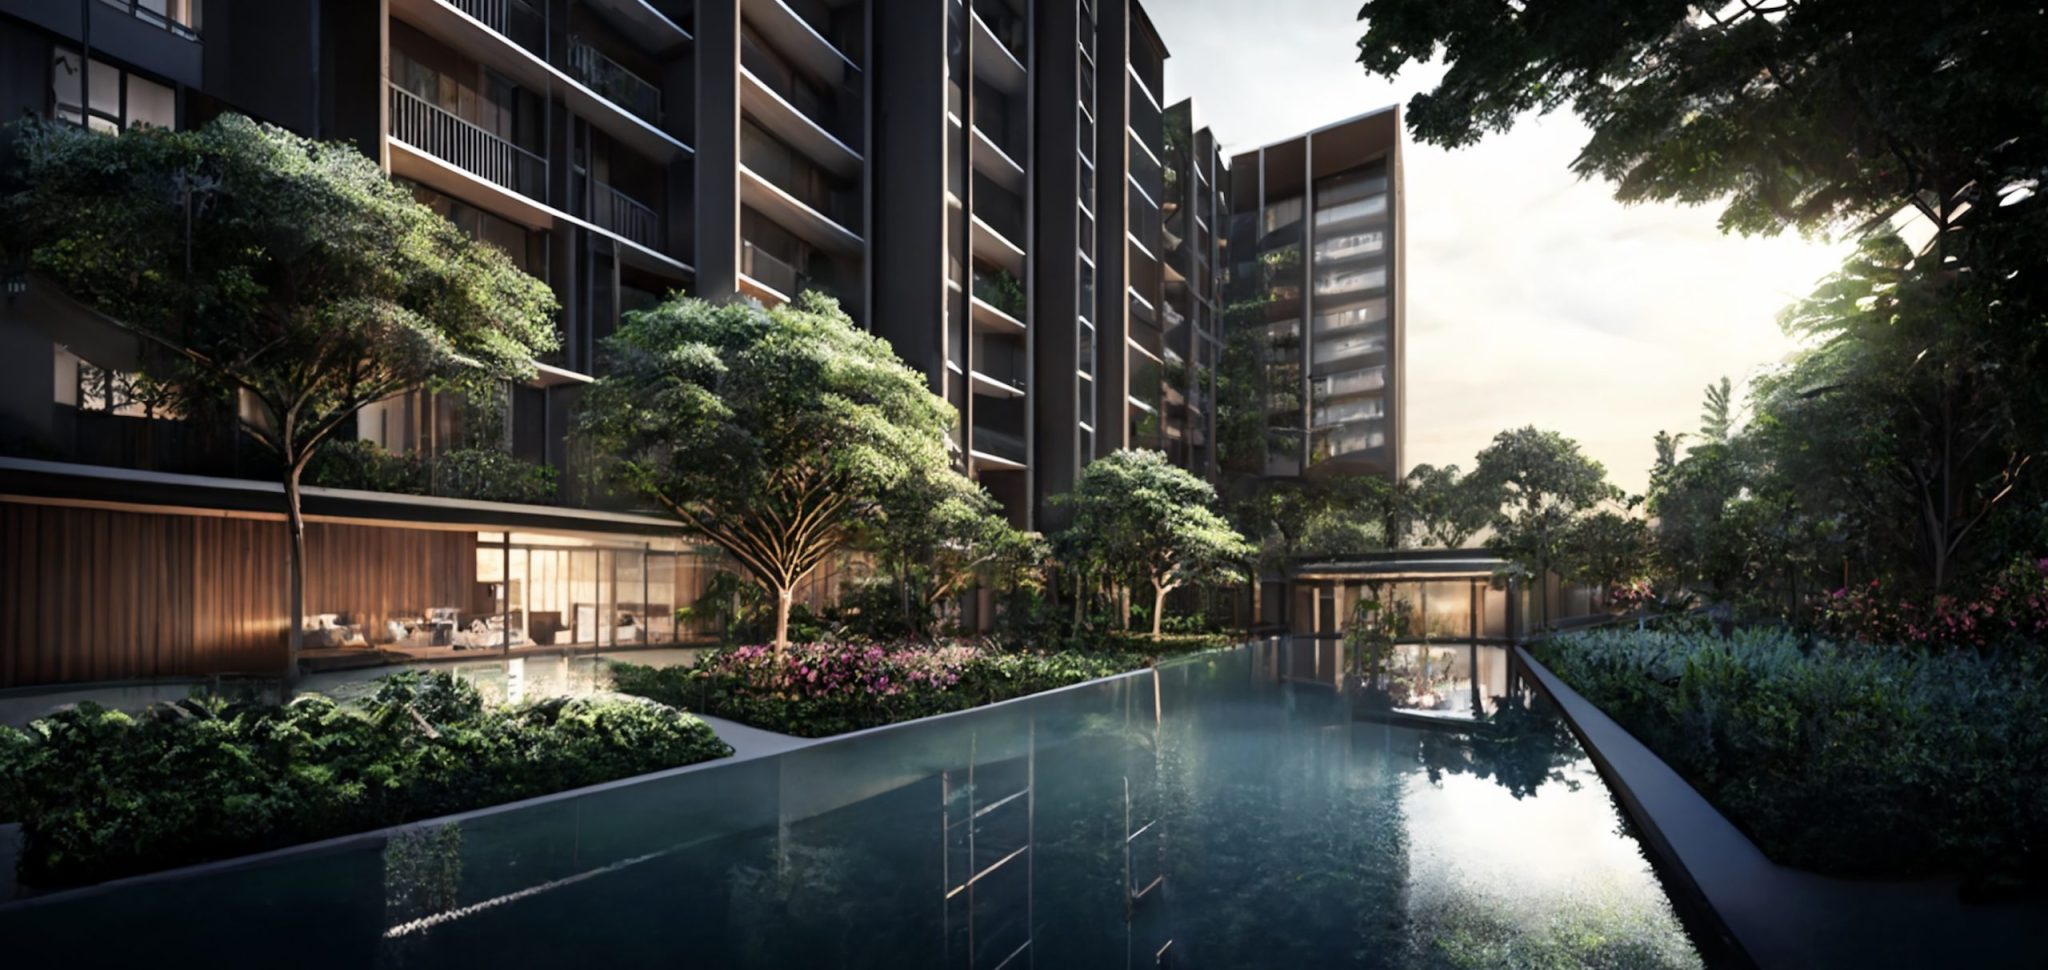 The Myst Condo – The Perfect Blend of Convenience and Nature